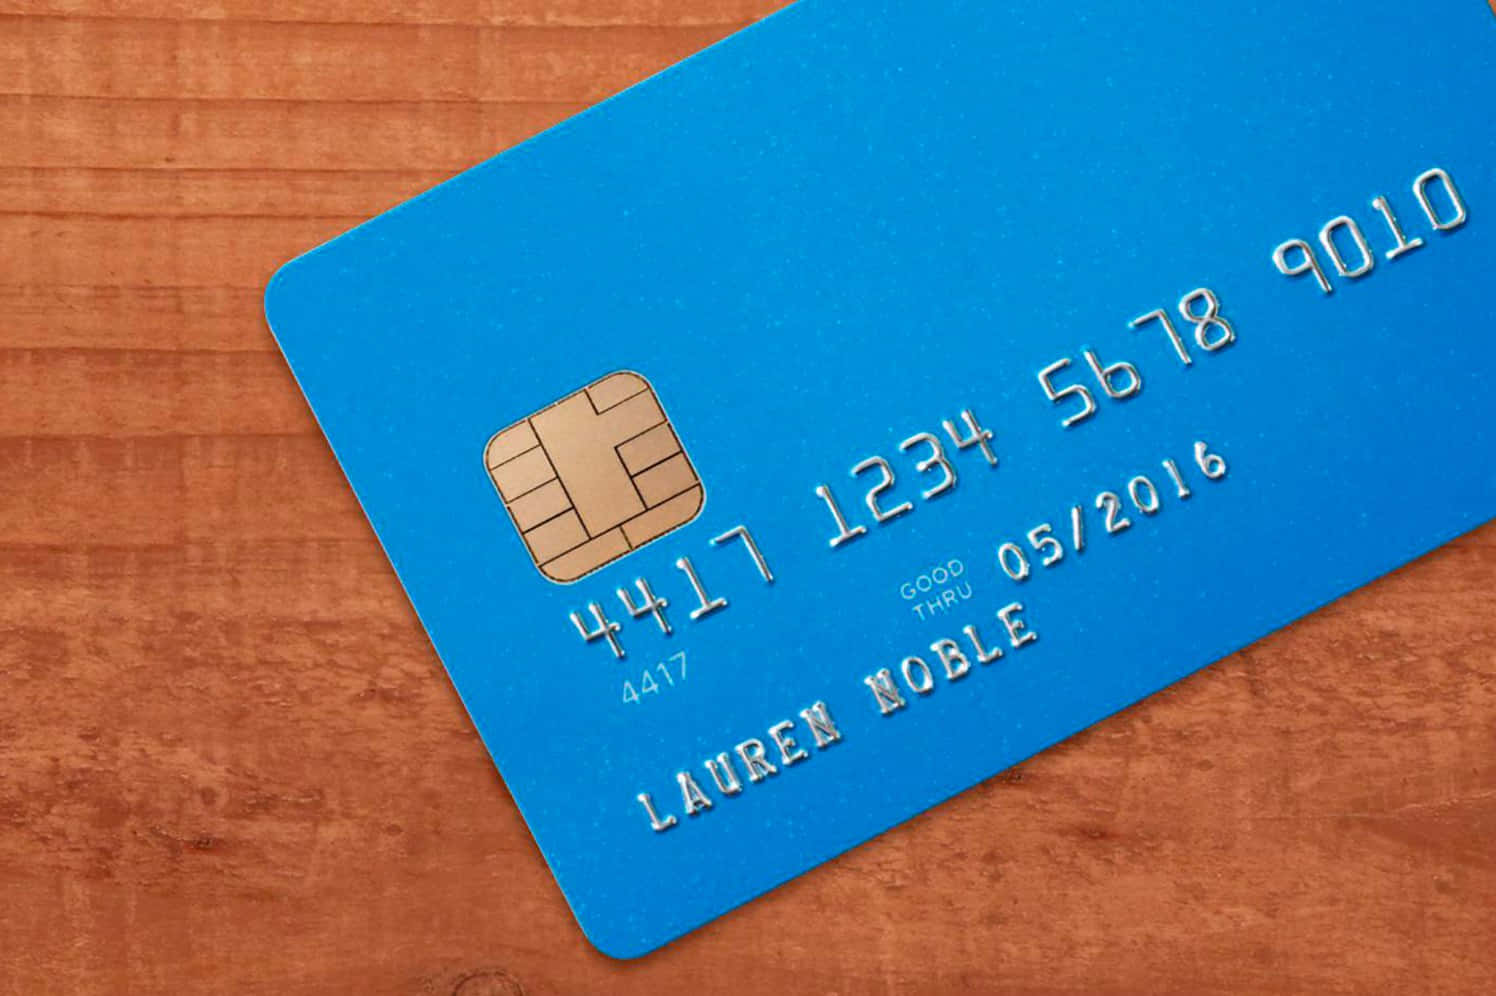 A Blue Credit Card On A Wooden Surface